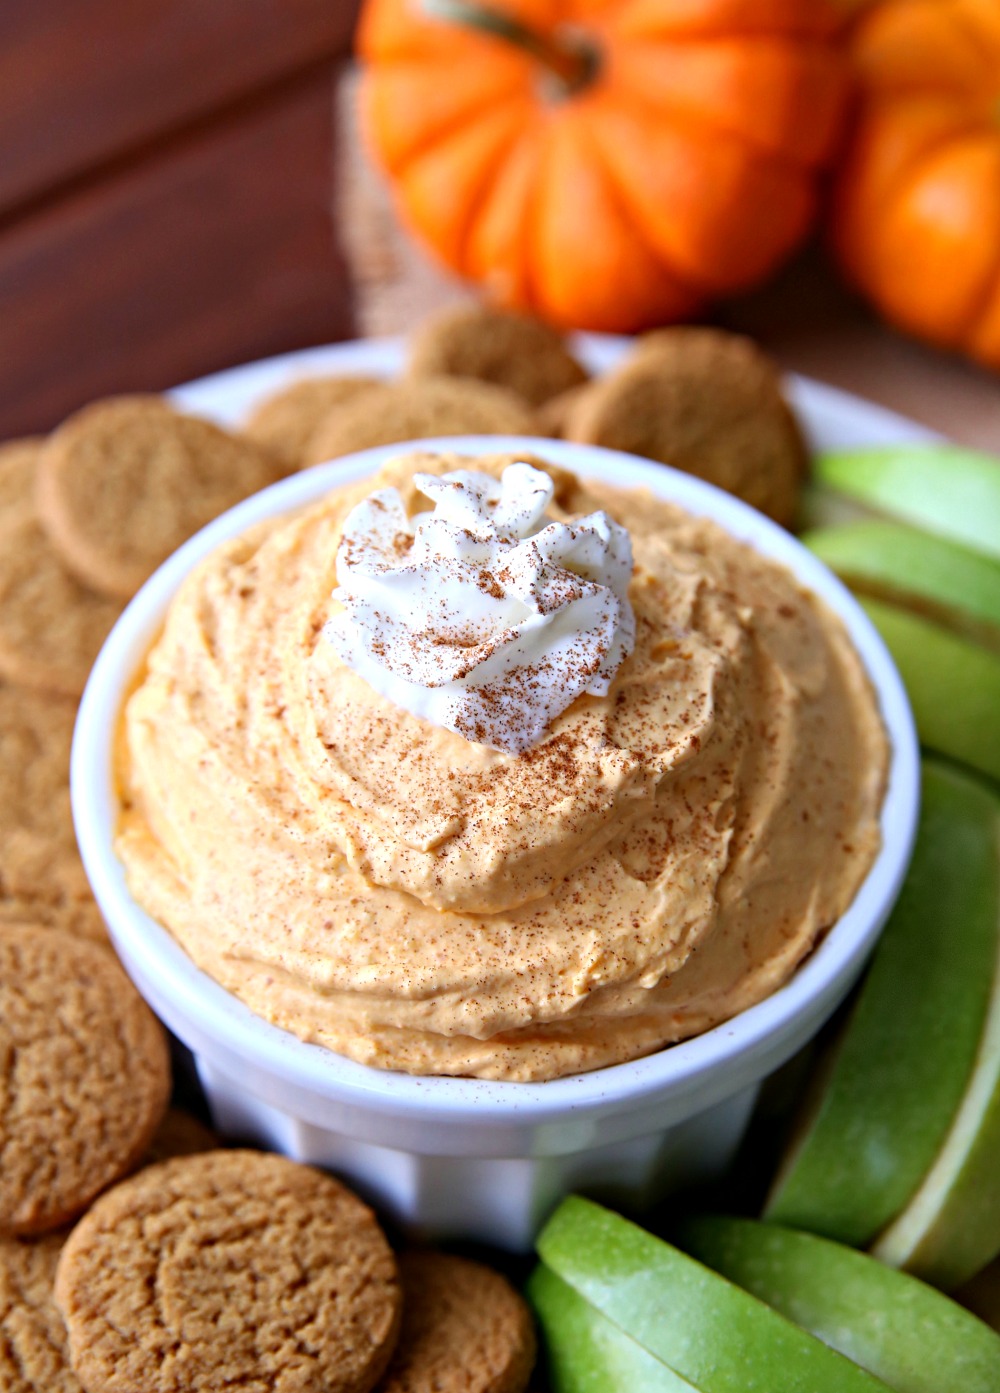 Pumpkin Pie Dip - A creamy dip with all the flavors of fall in one bowl. Perfect for dipping cookies and fruit.